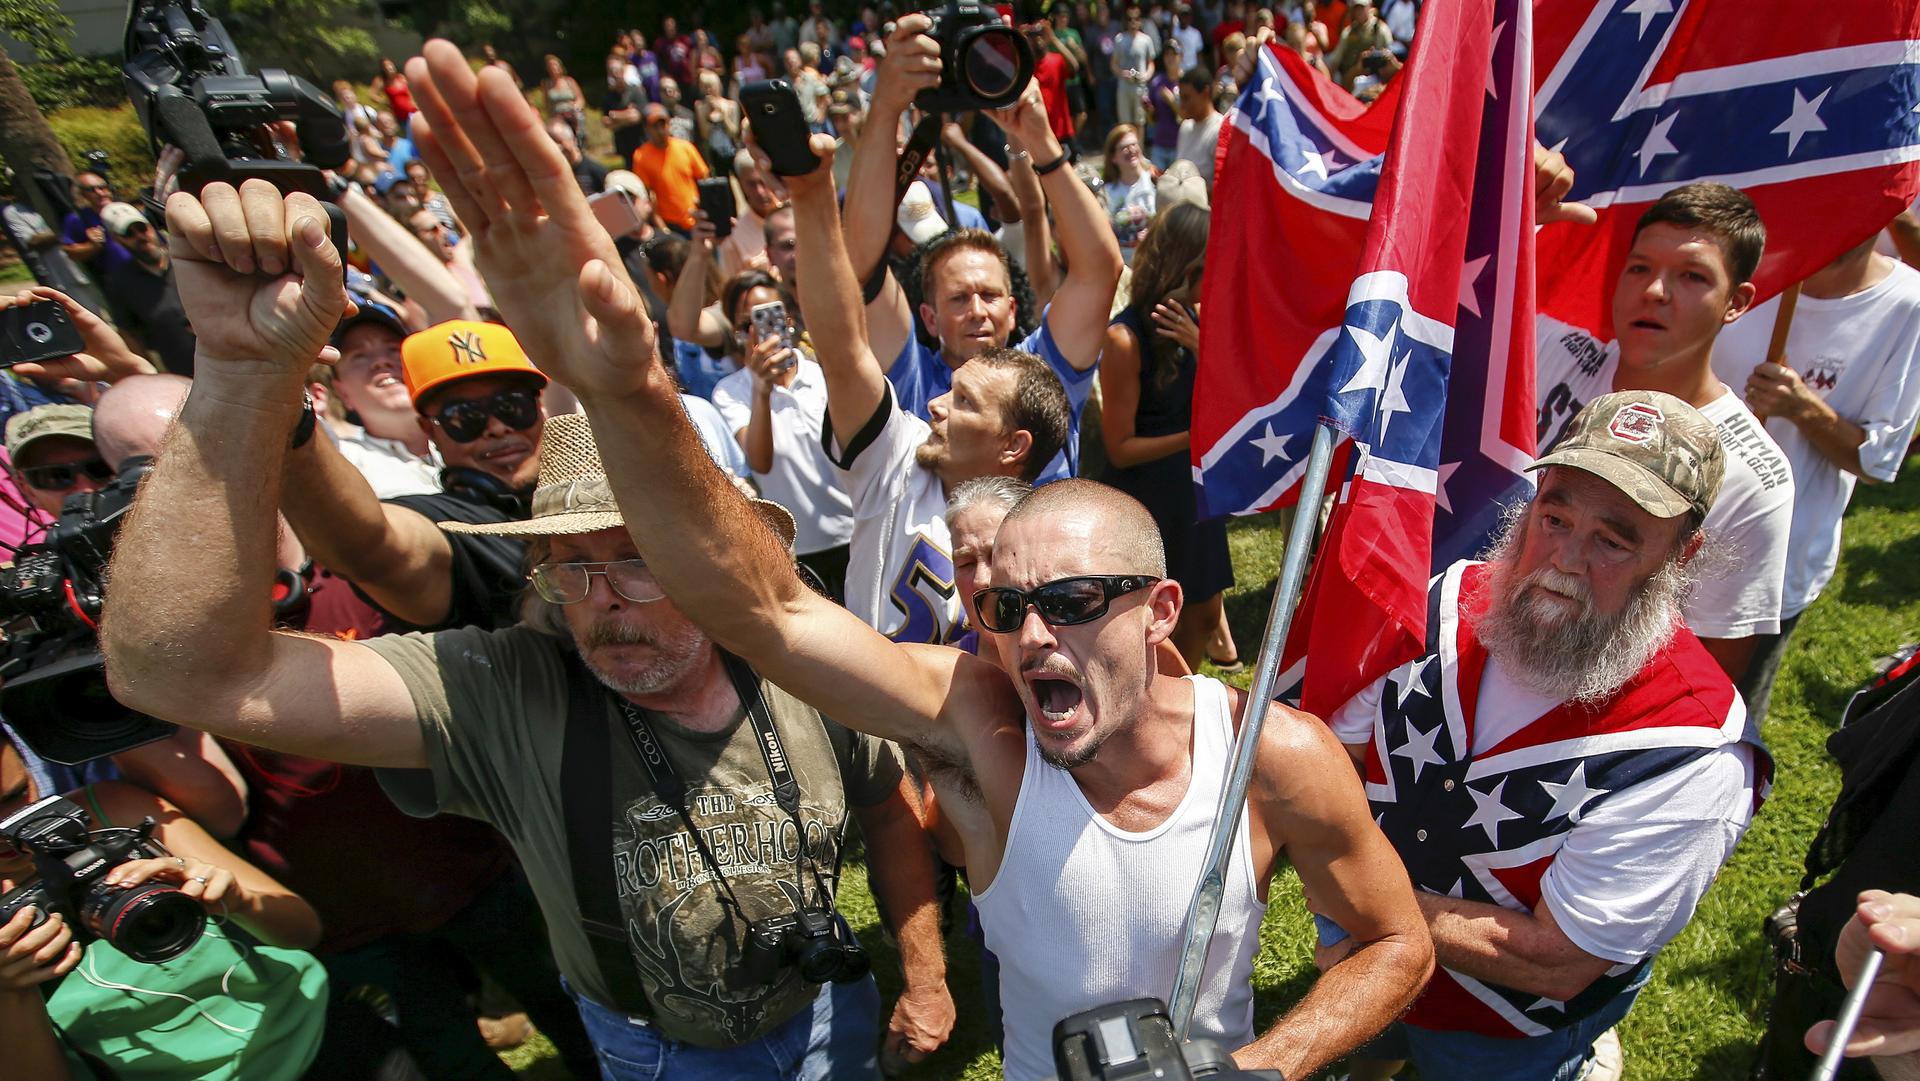 Demonstrators rally at the statehouse in Columbia, South Carolina, July 18, 2015, after state officials decided to remove the Confederate battle flag from the grounds.